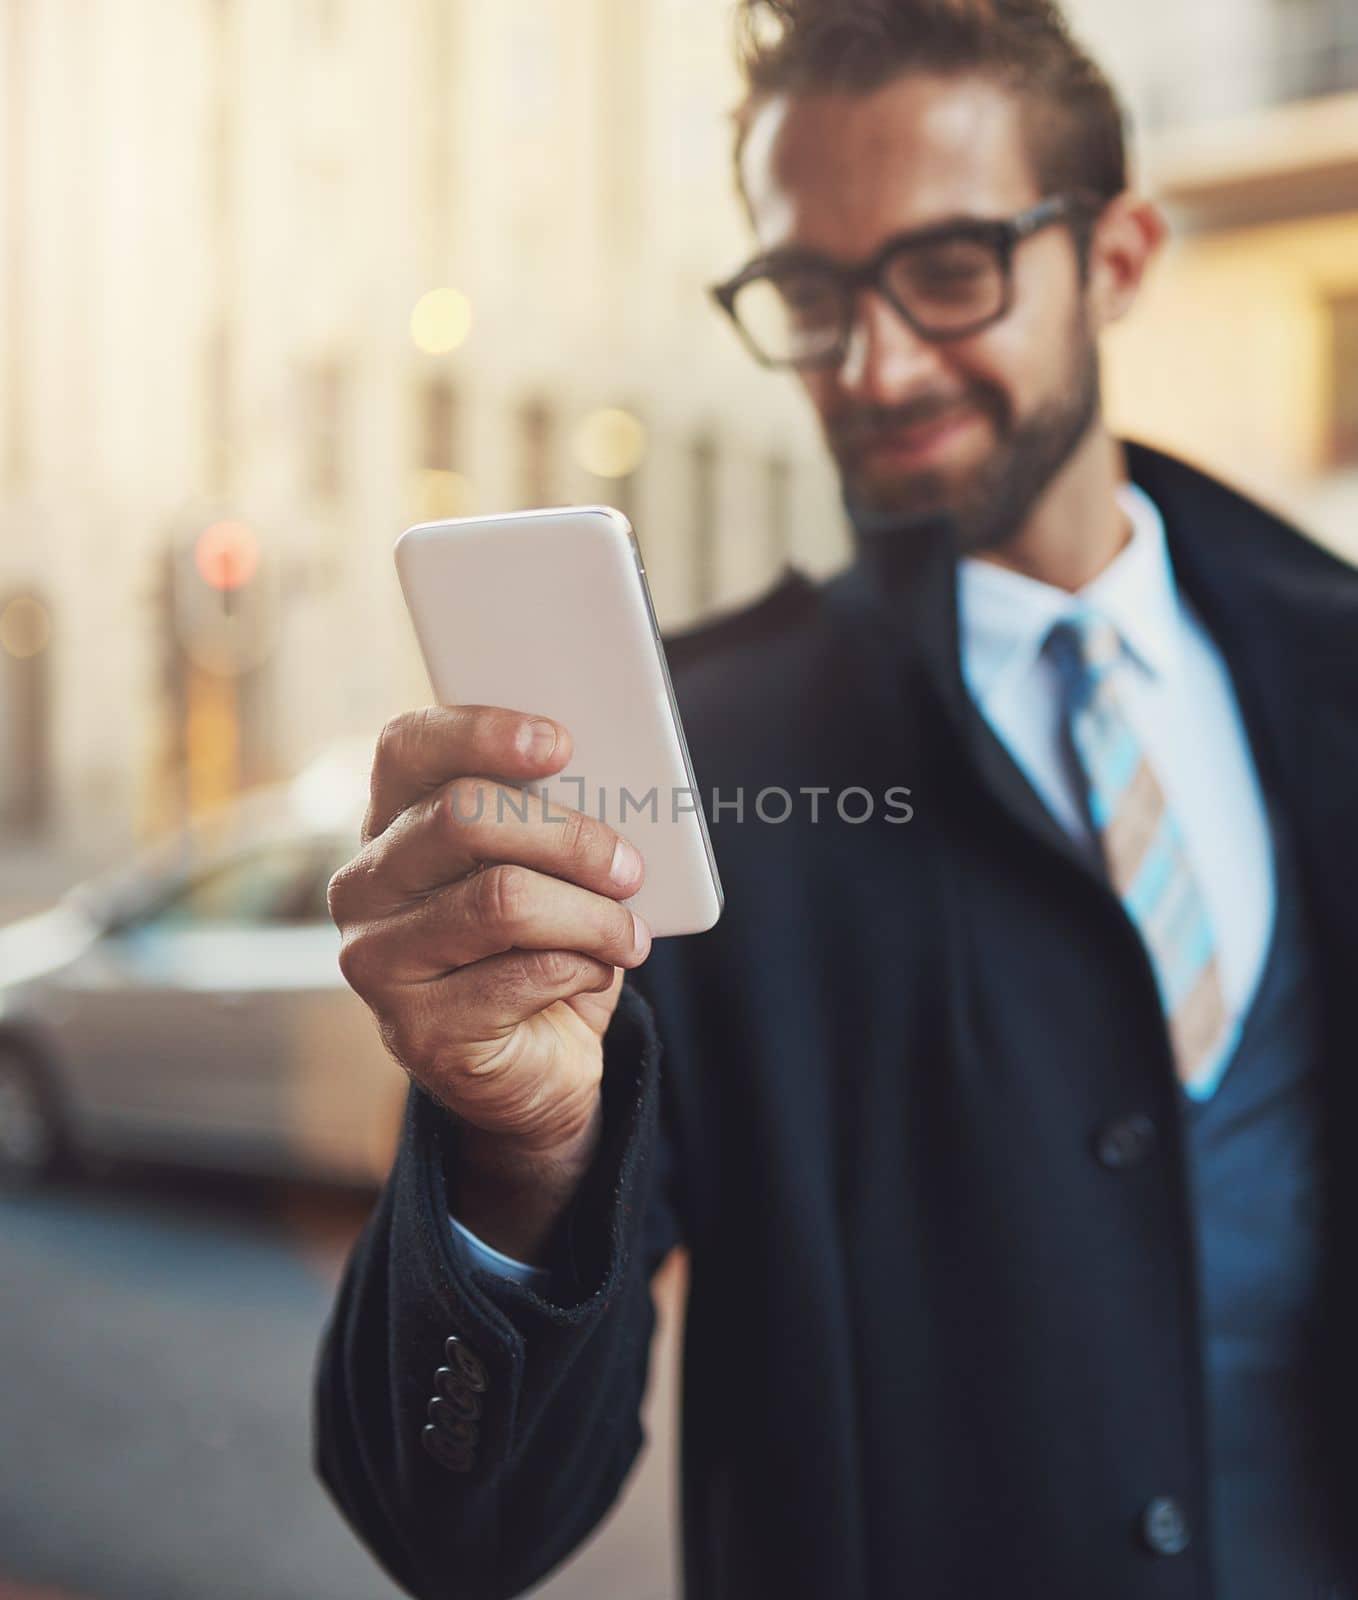 Wireless technology meets his modern needs. a stylish man using his phone in the city